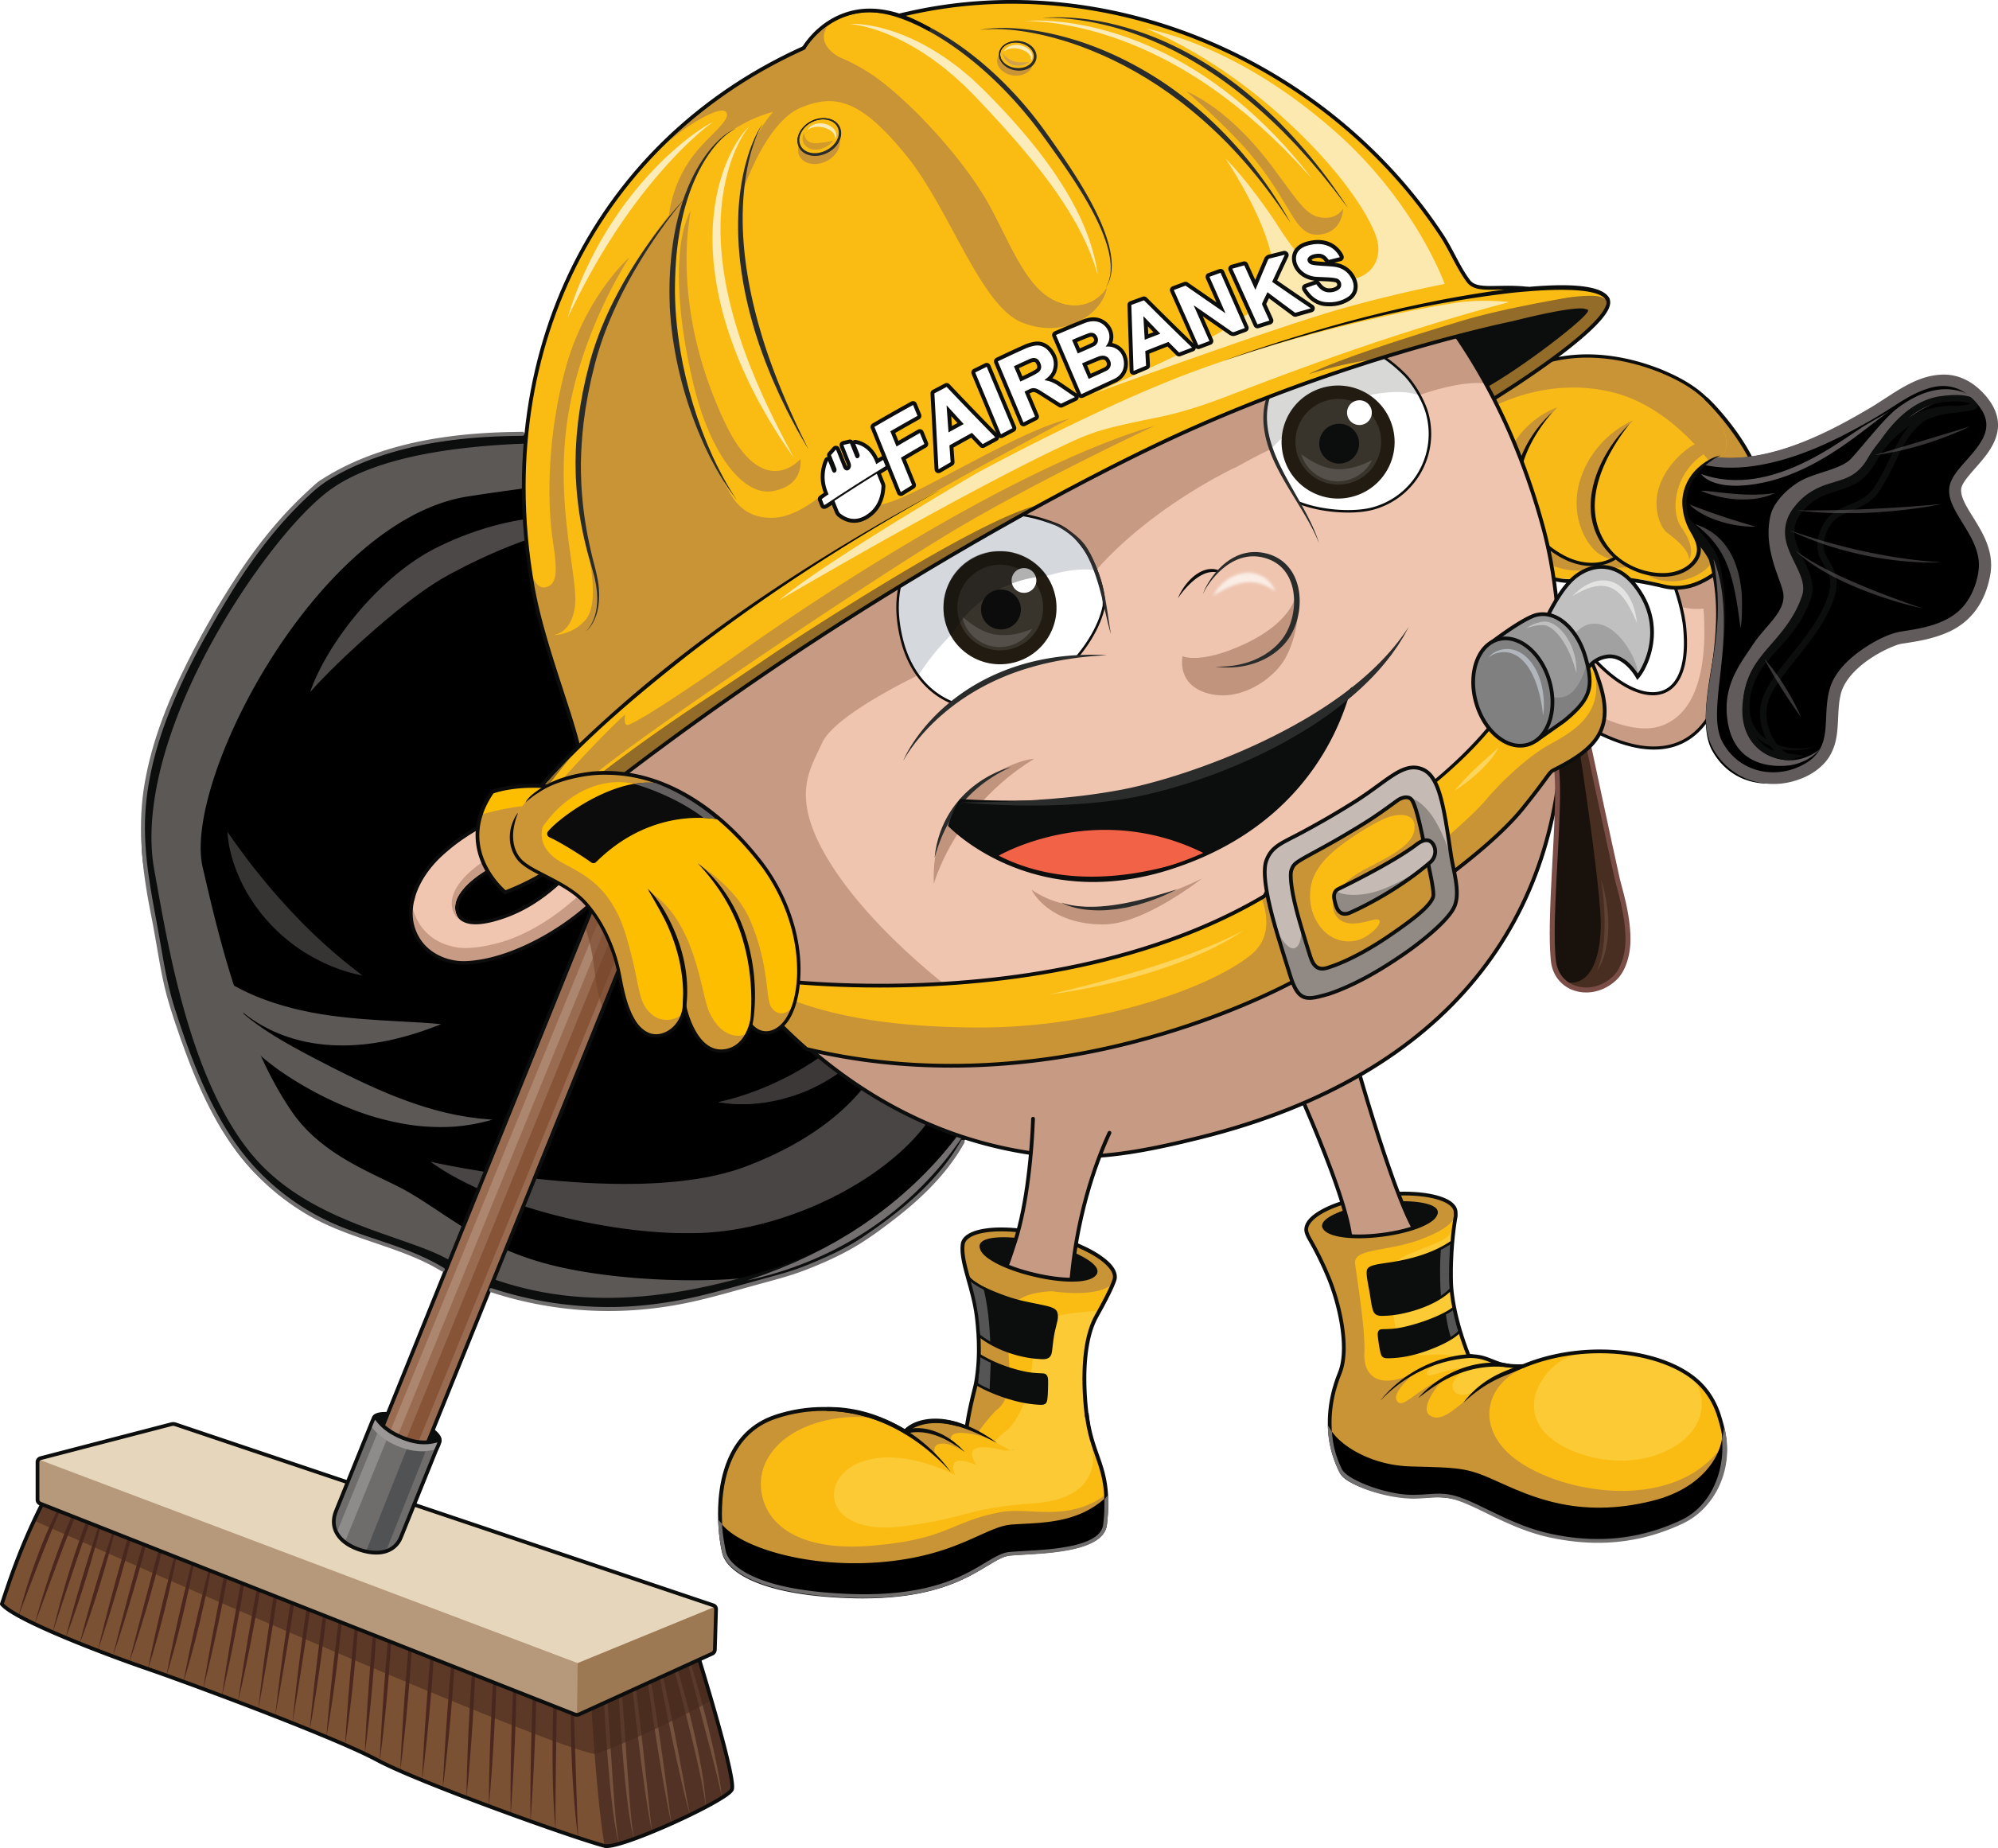 Construction Clean Up Liability Insurance Mascot